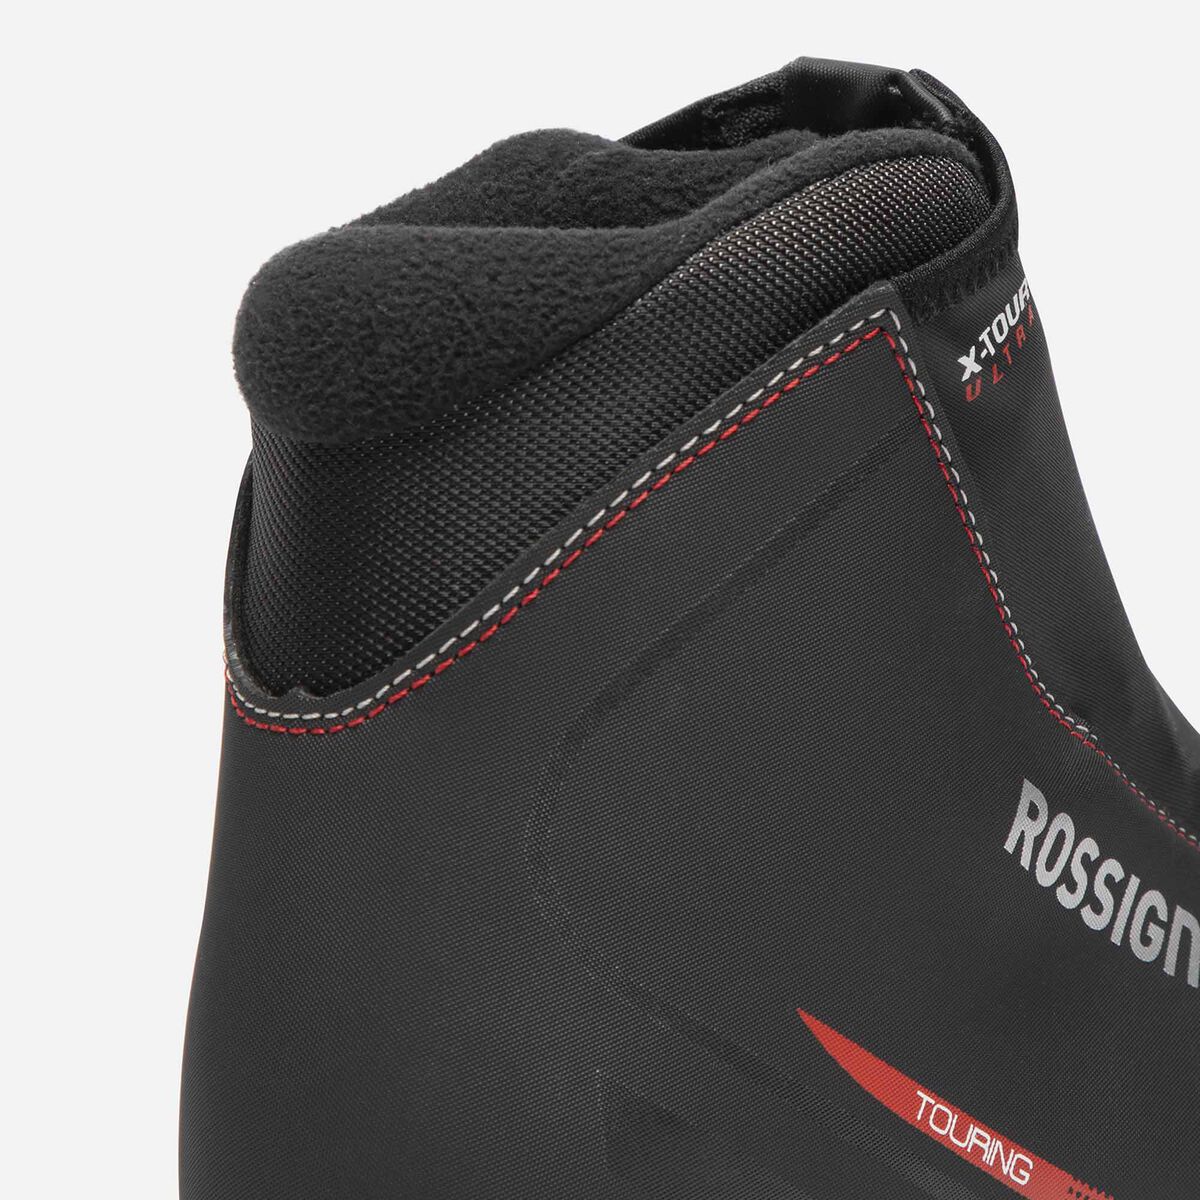 Unisex Touring Nordic Boots X-Tour Ultra